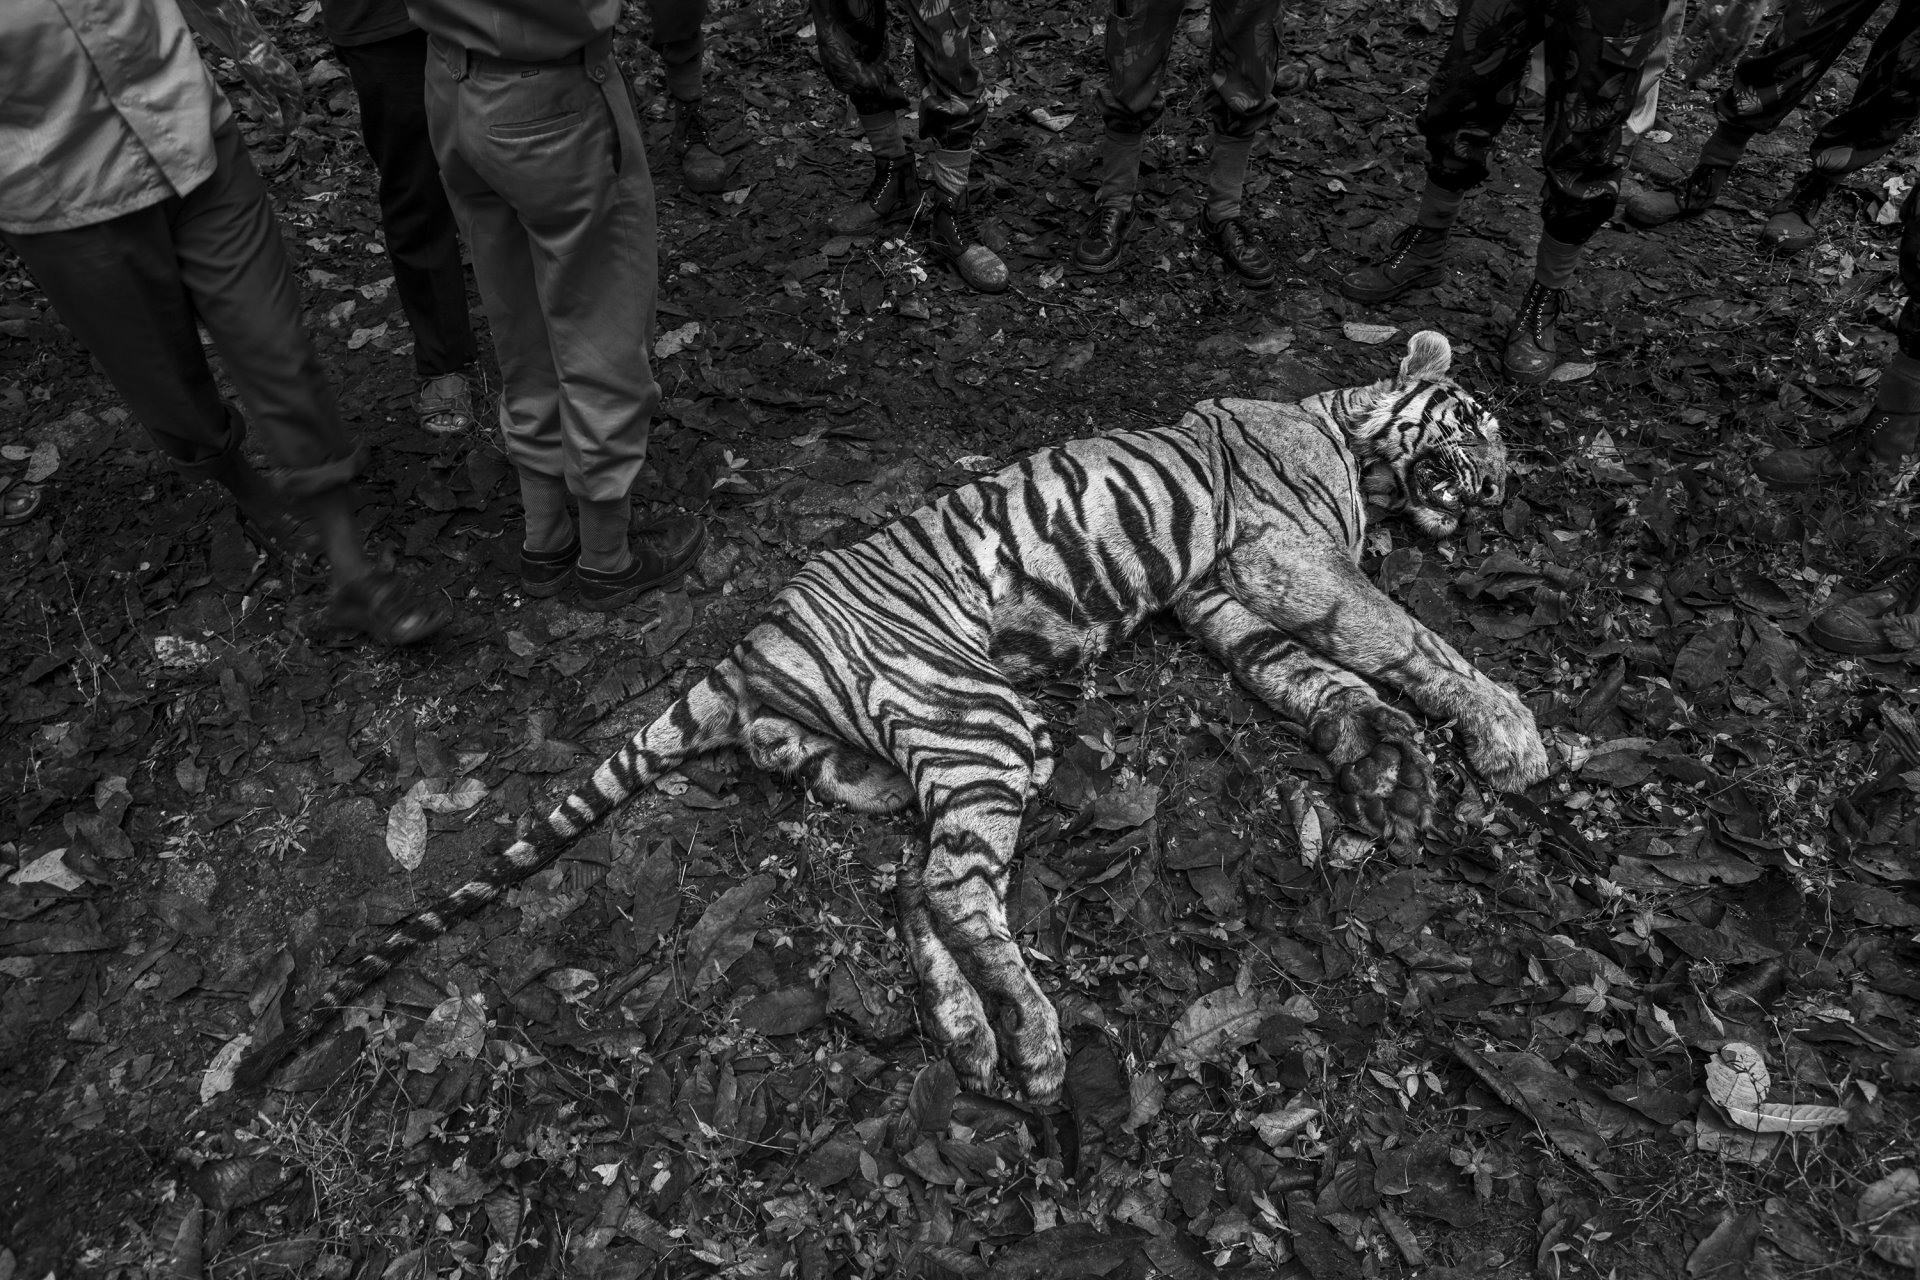 A tiger lies dead in unexplained circumstances, at a village near the Anamalai Tiger Reserve, in Tamil Nadu, India.